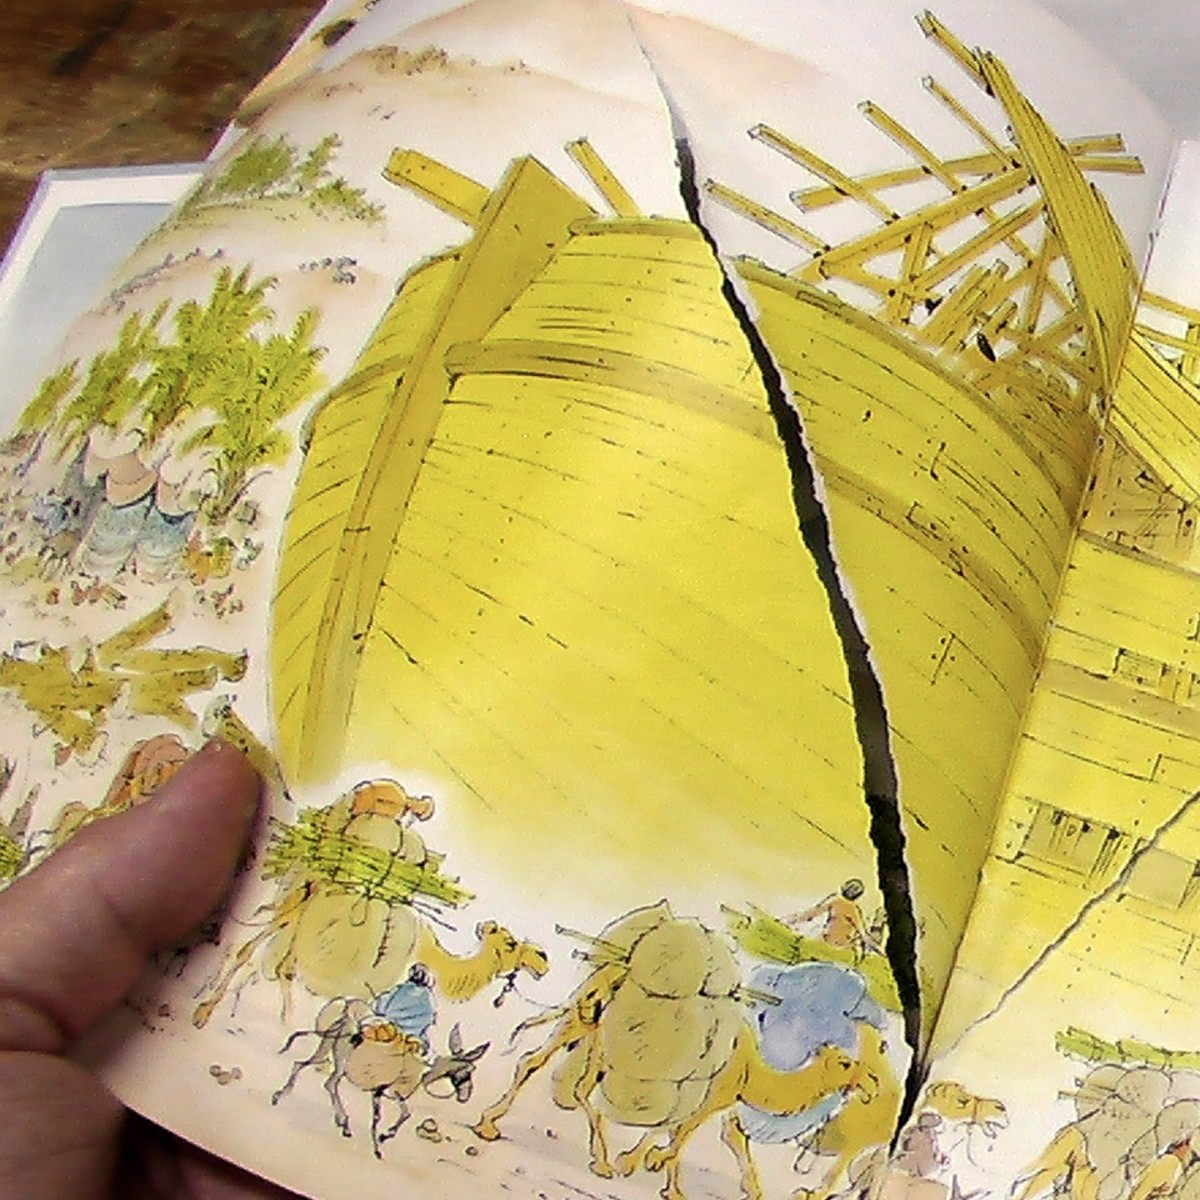 Oops! Another torn page to be repaired! Accidents will happen when a book is well-used and loved.